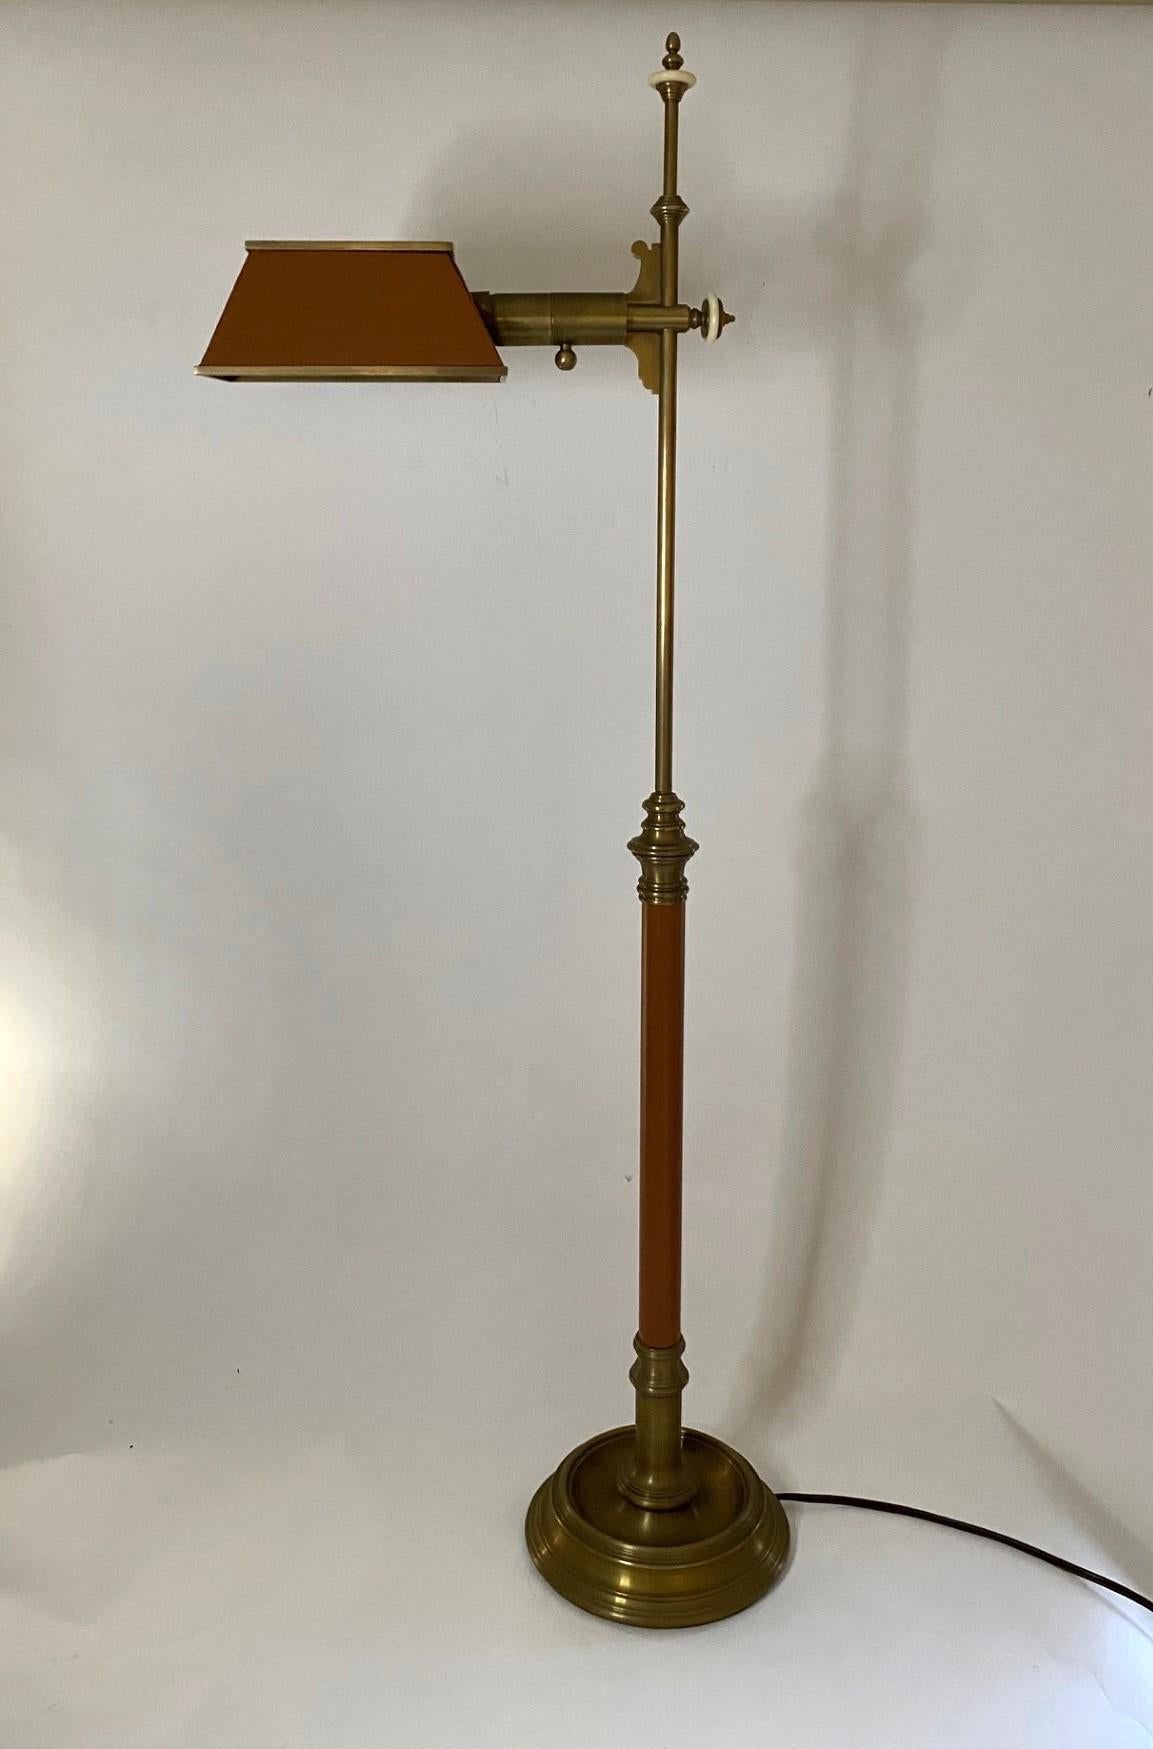 Wonderful New Chapman Solid Brass & Havana Leather Floor Lamp with Tilt Shade and Dimmer Switch. 